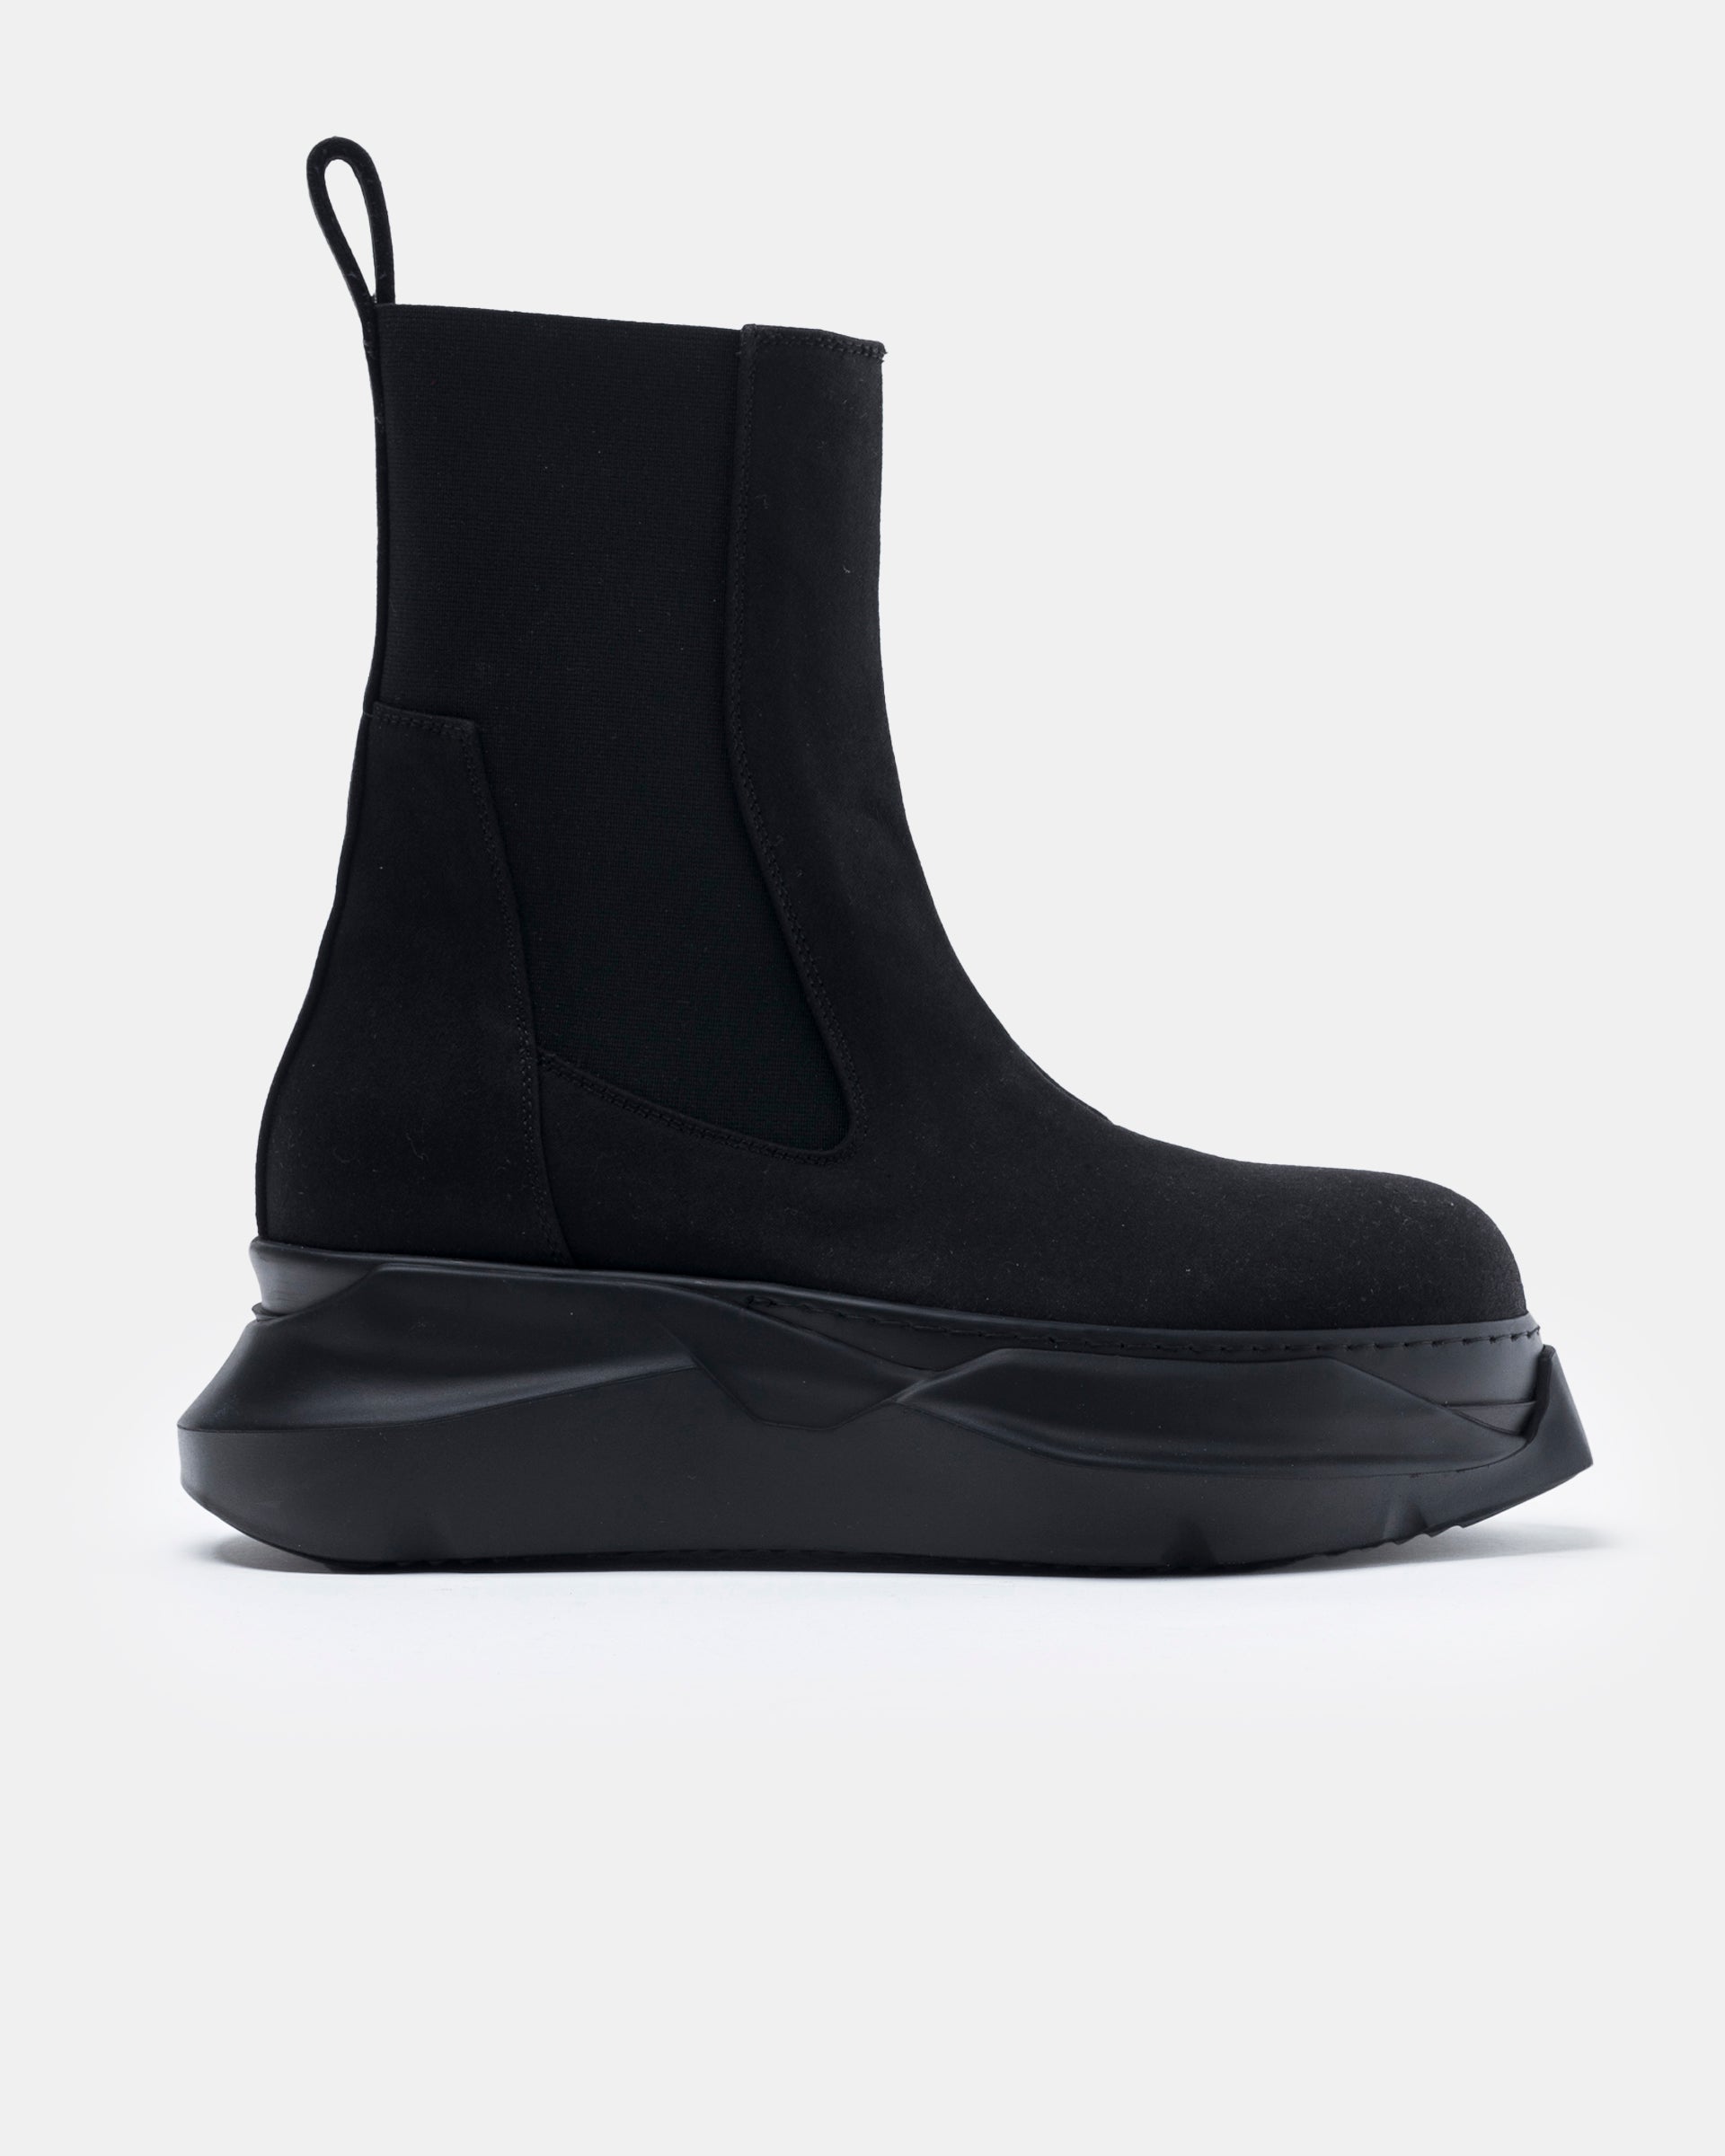 Rick Owens Black Beatle Abstract Boots on white background